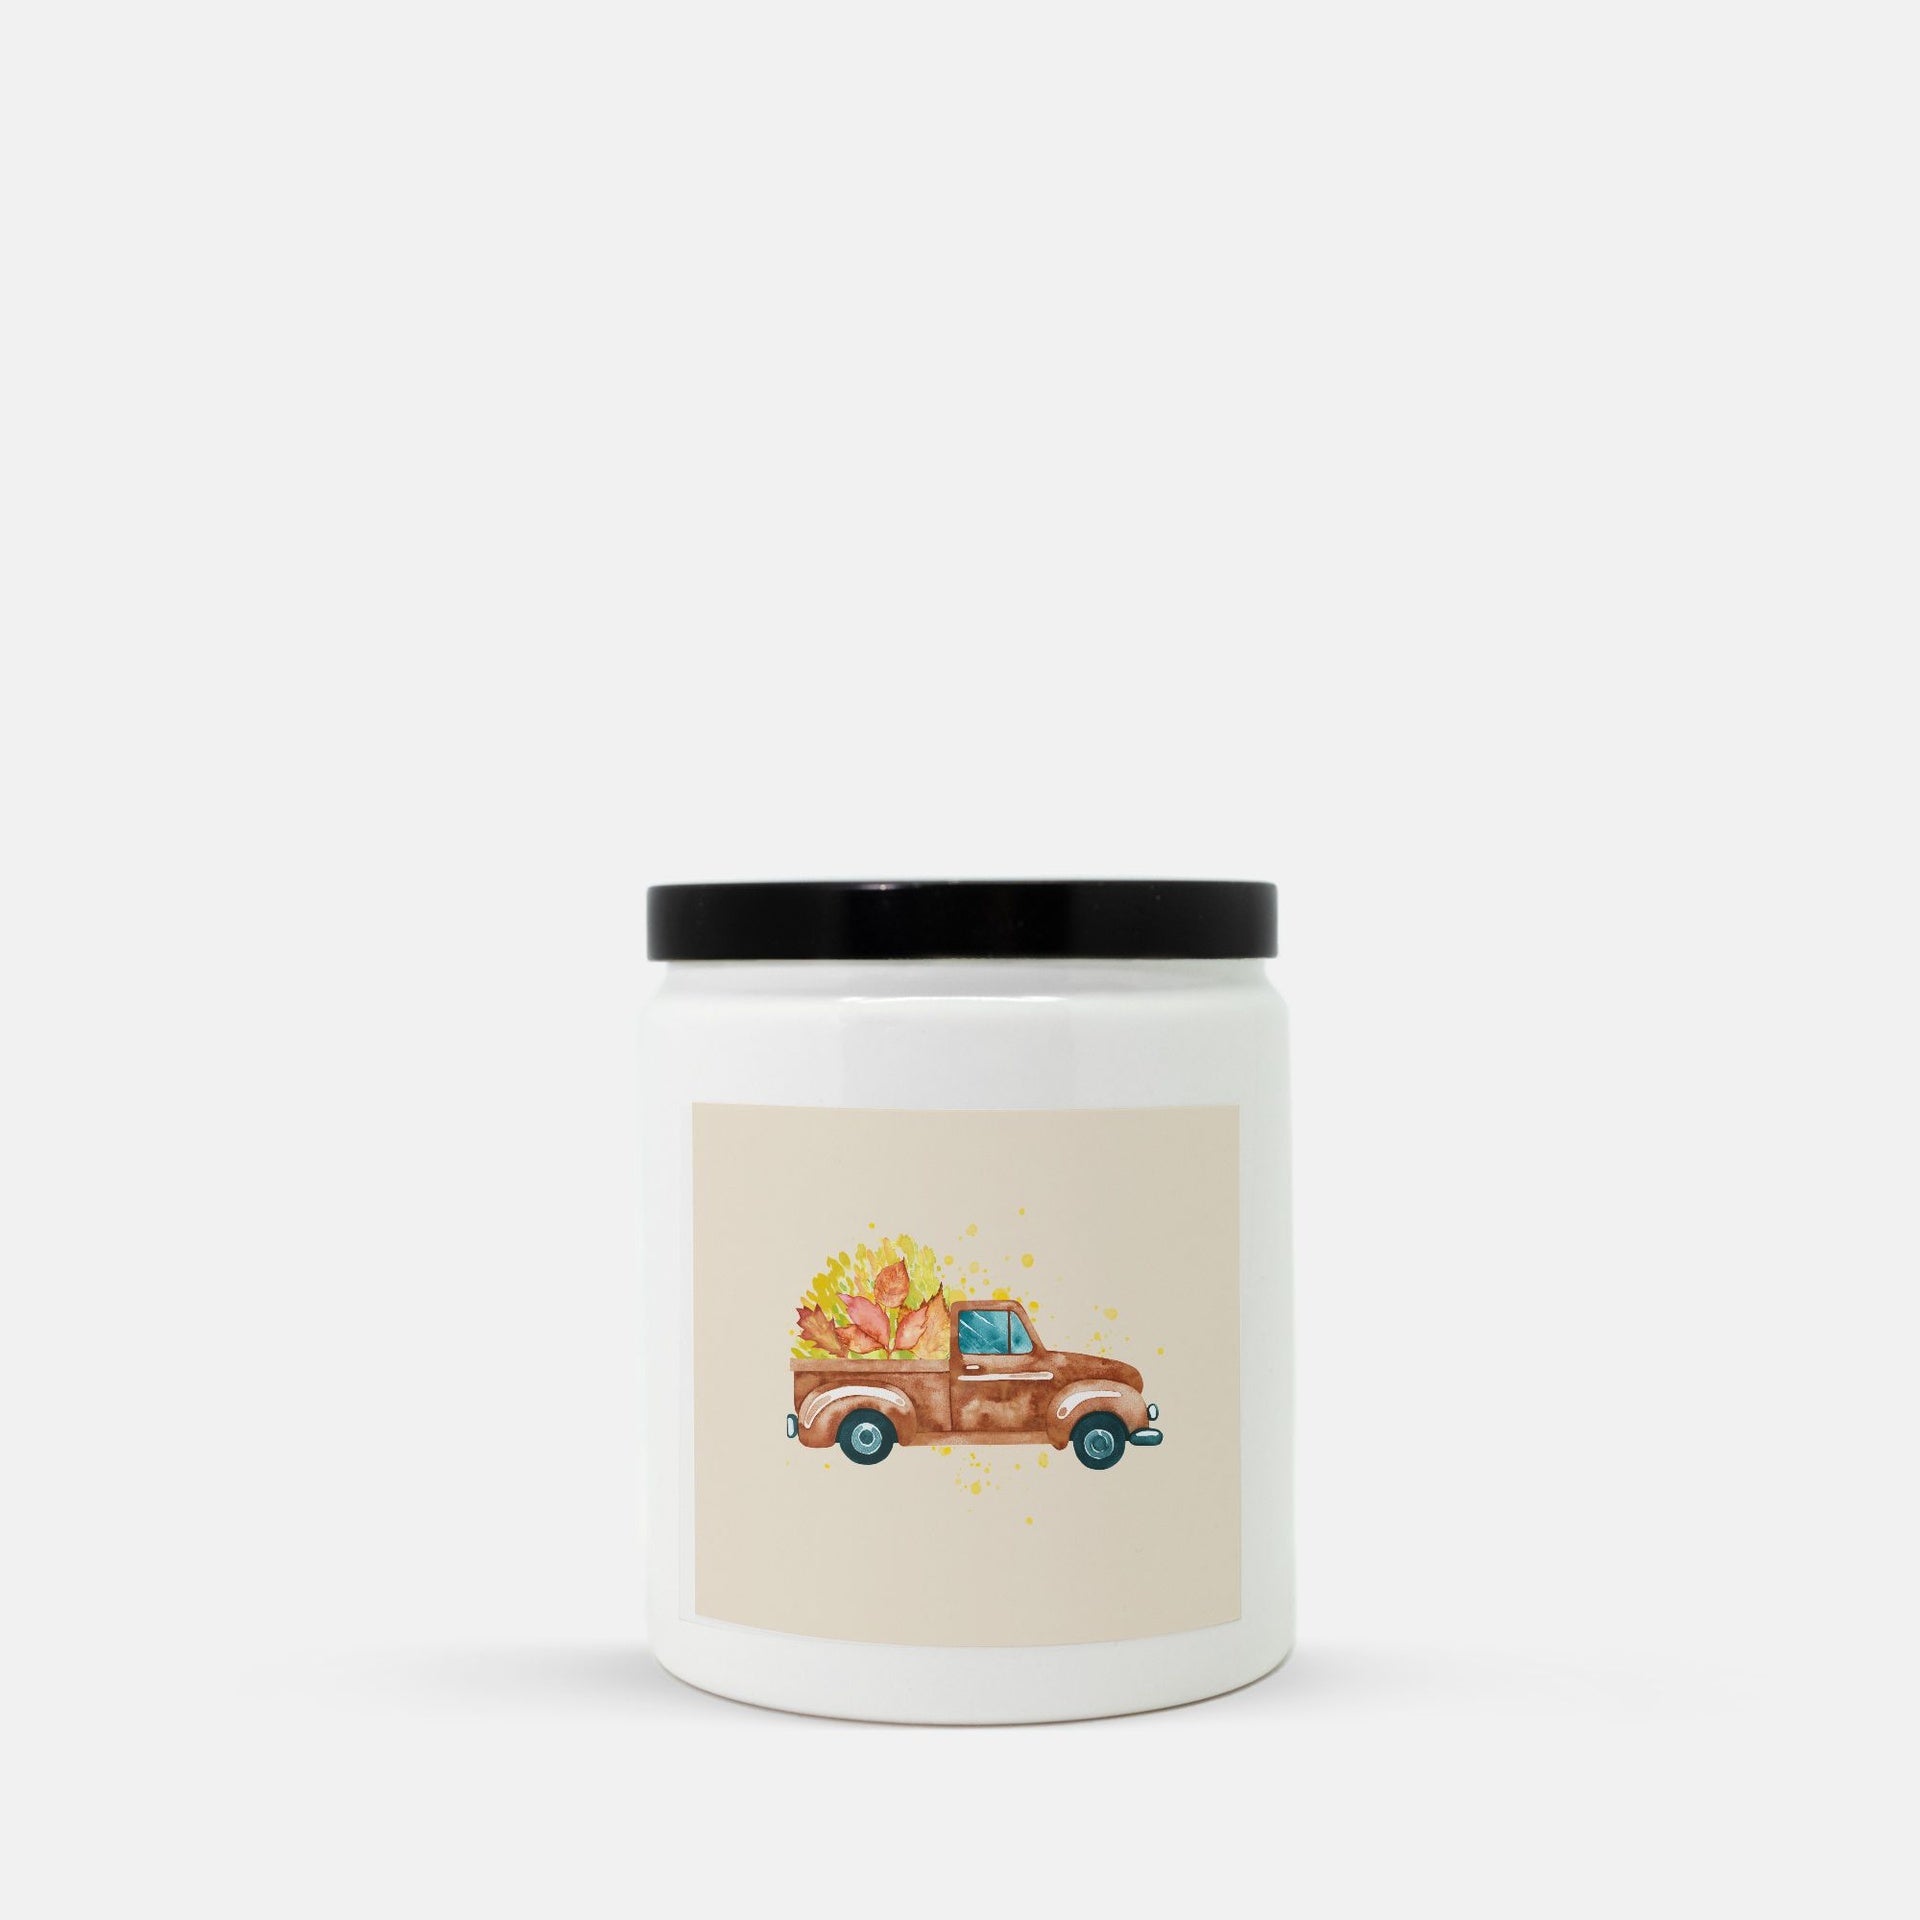 Lifestyle Details - Brown Rustic Truck & Leaves Ceramic Candle w Black Lid - Vanilla Bean